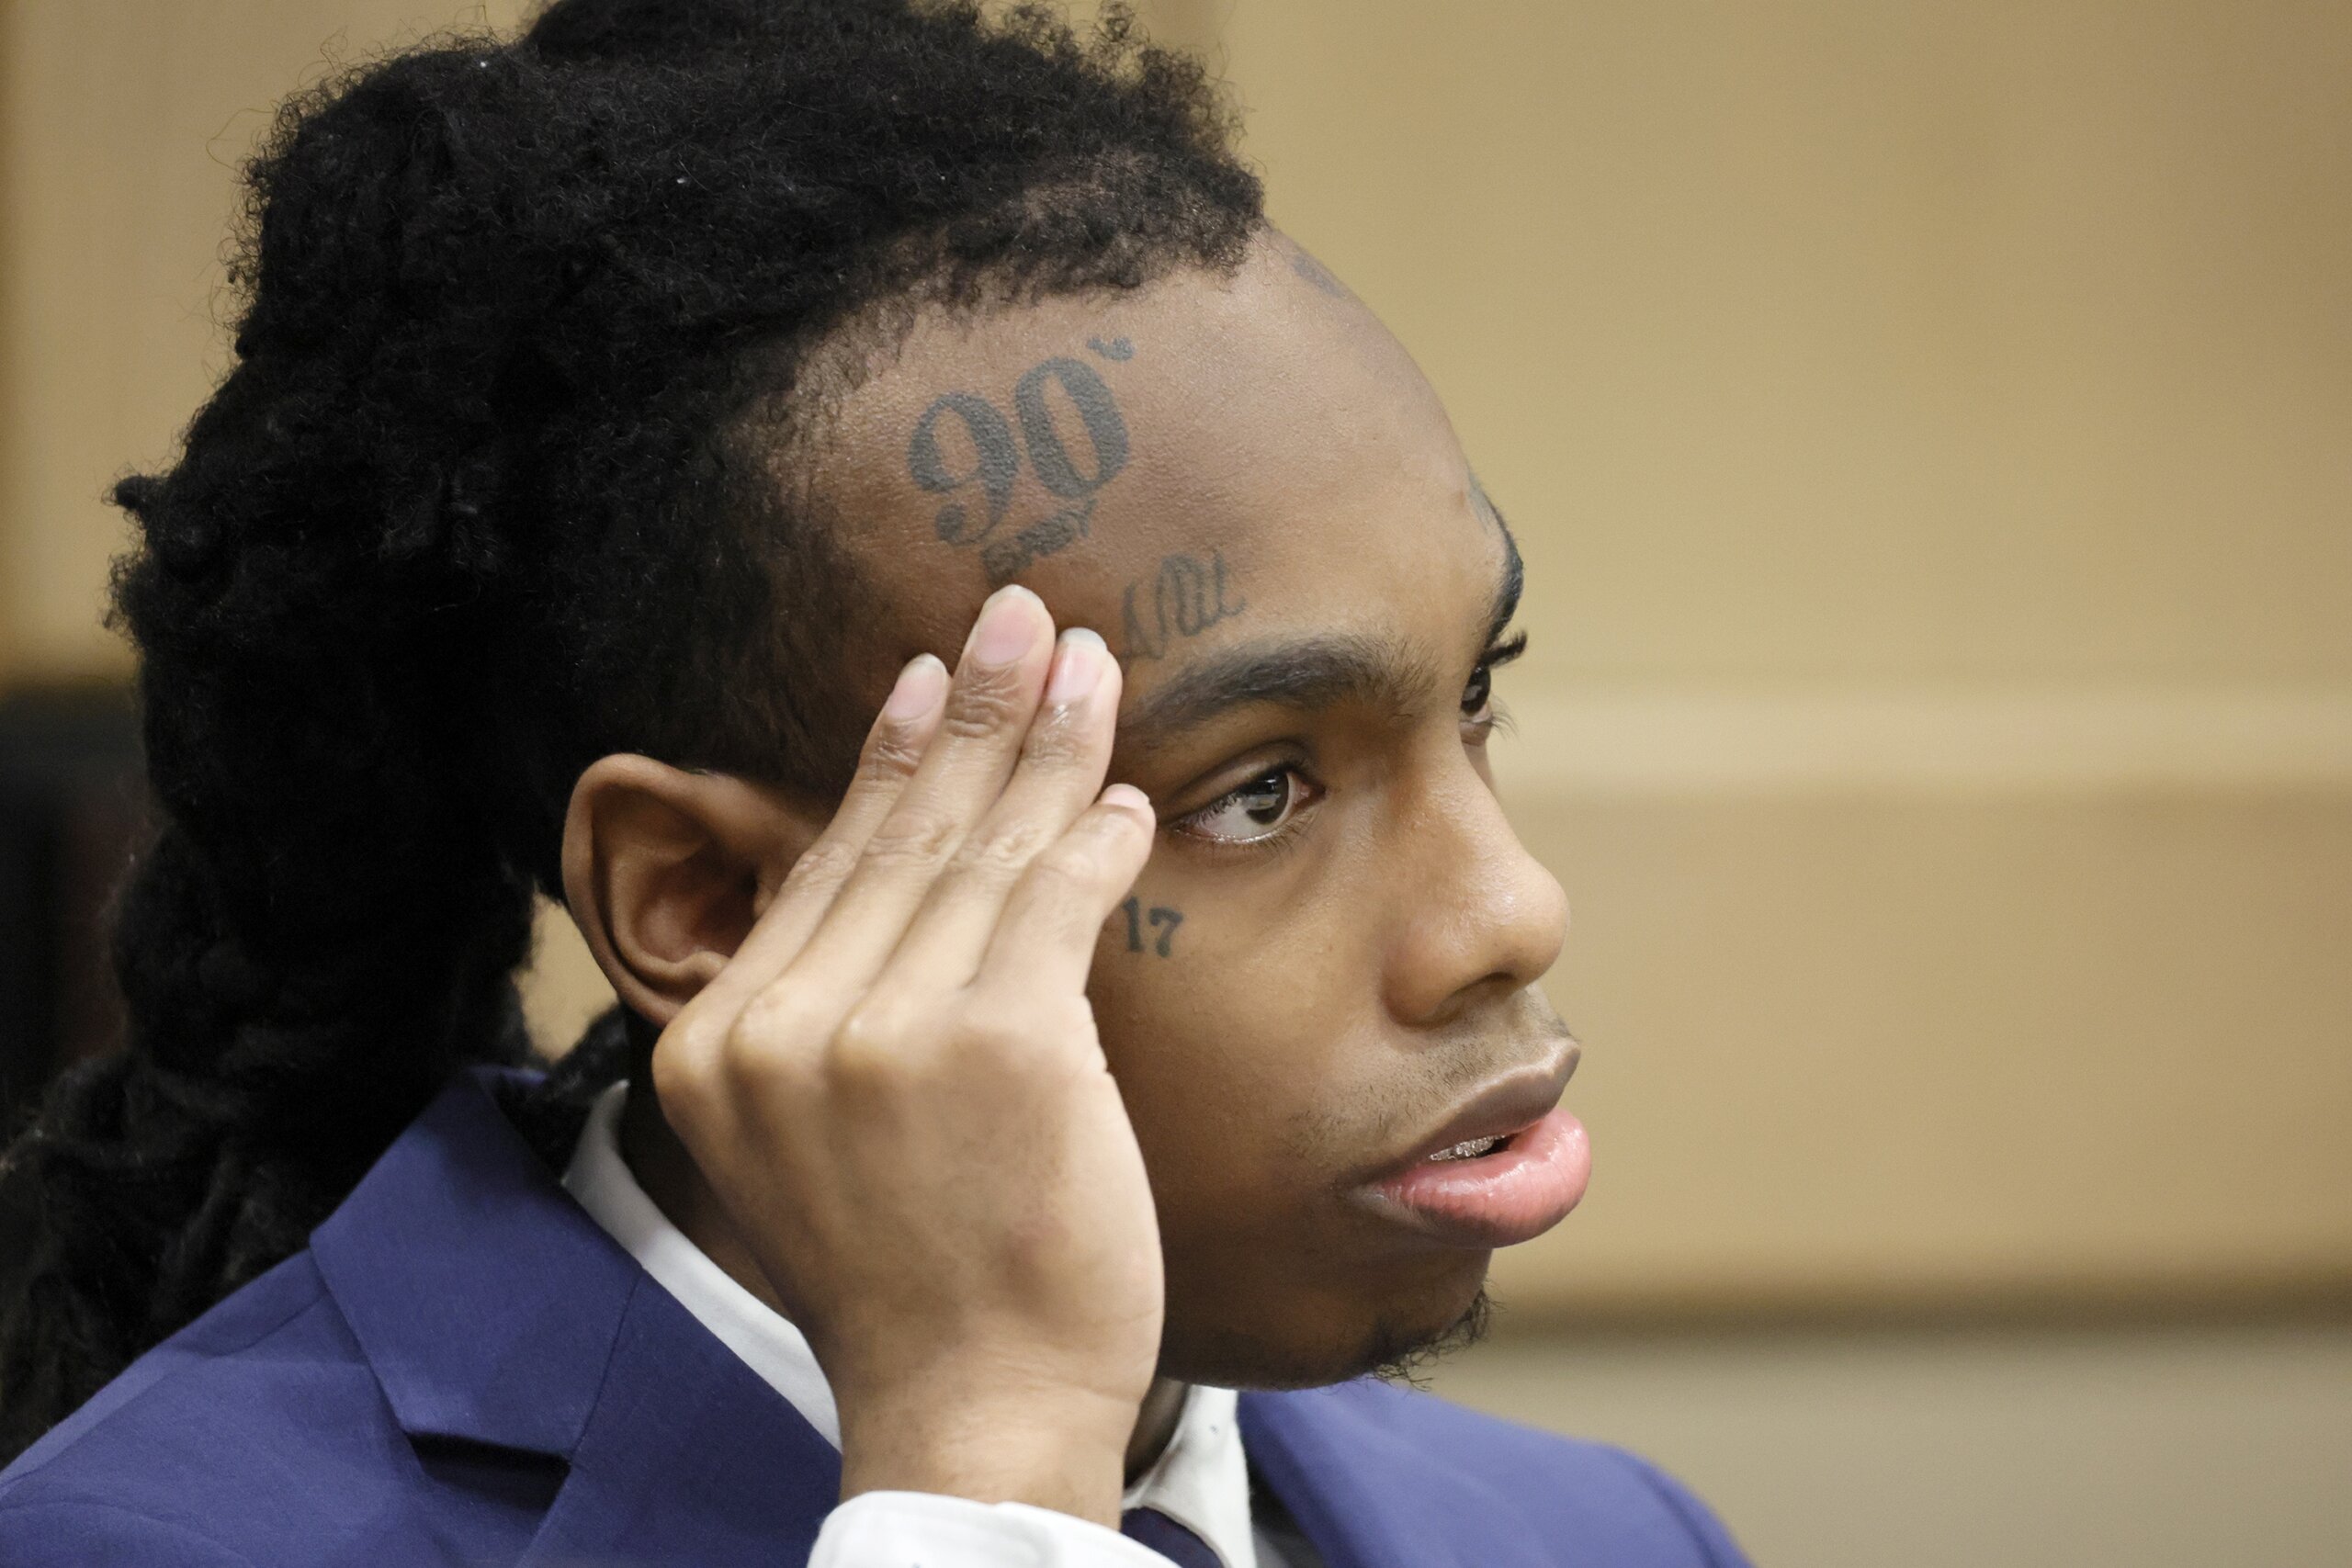 Jury Deliberations Underway In Double Murder Trial Of Rapper Ynw Melly In South Florida Wtop News